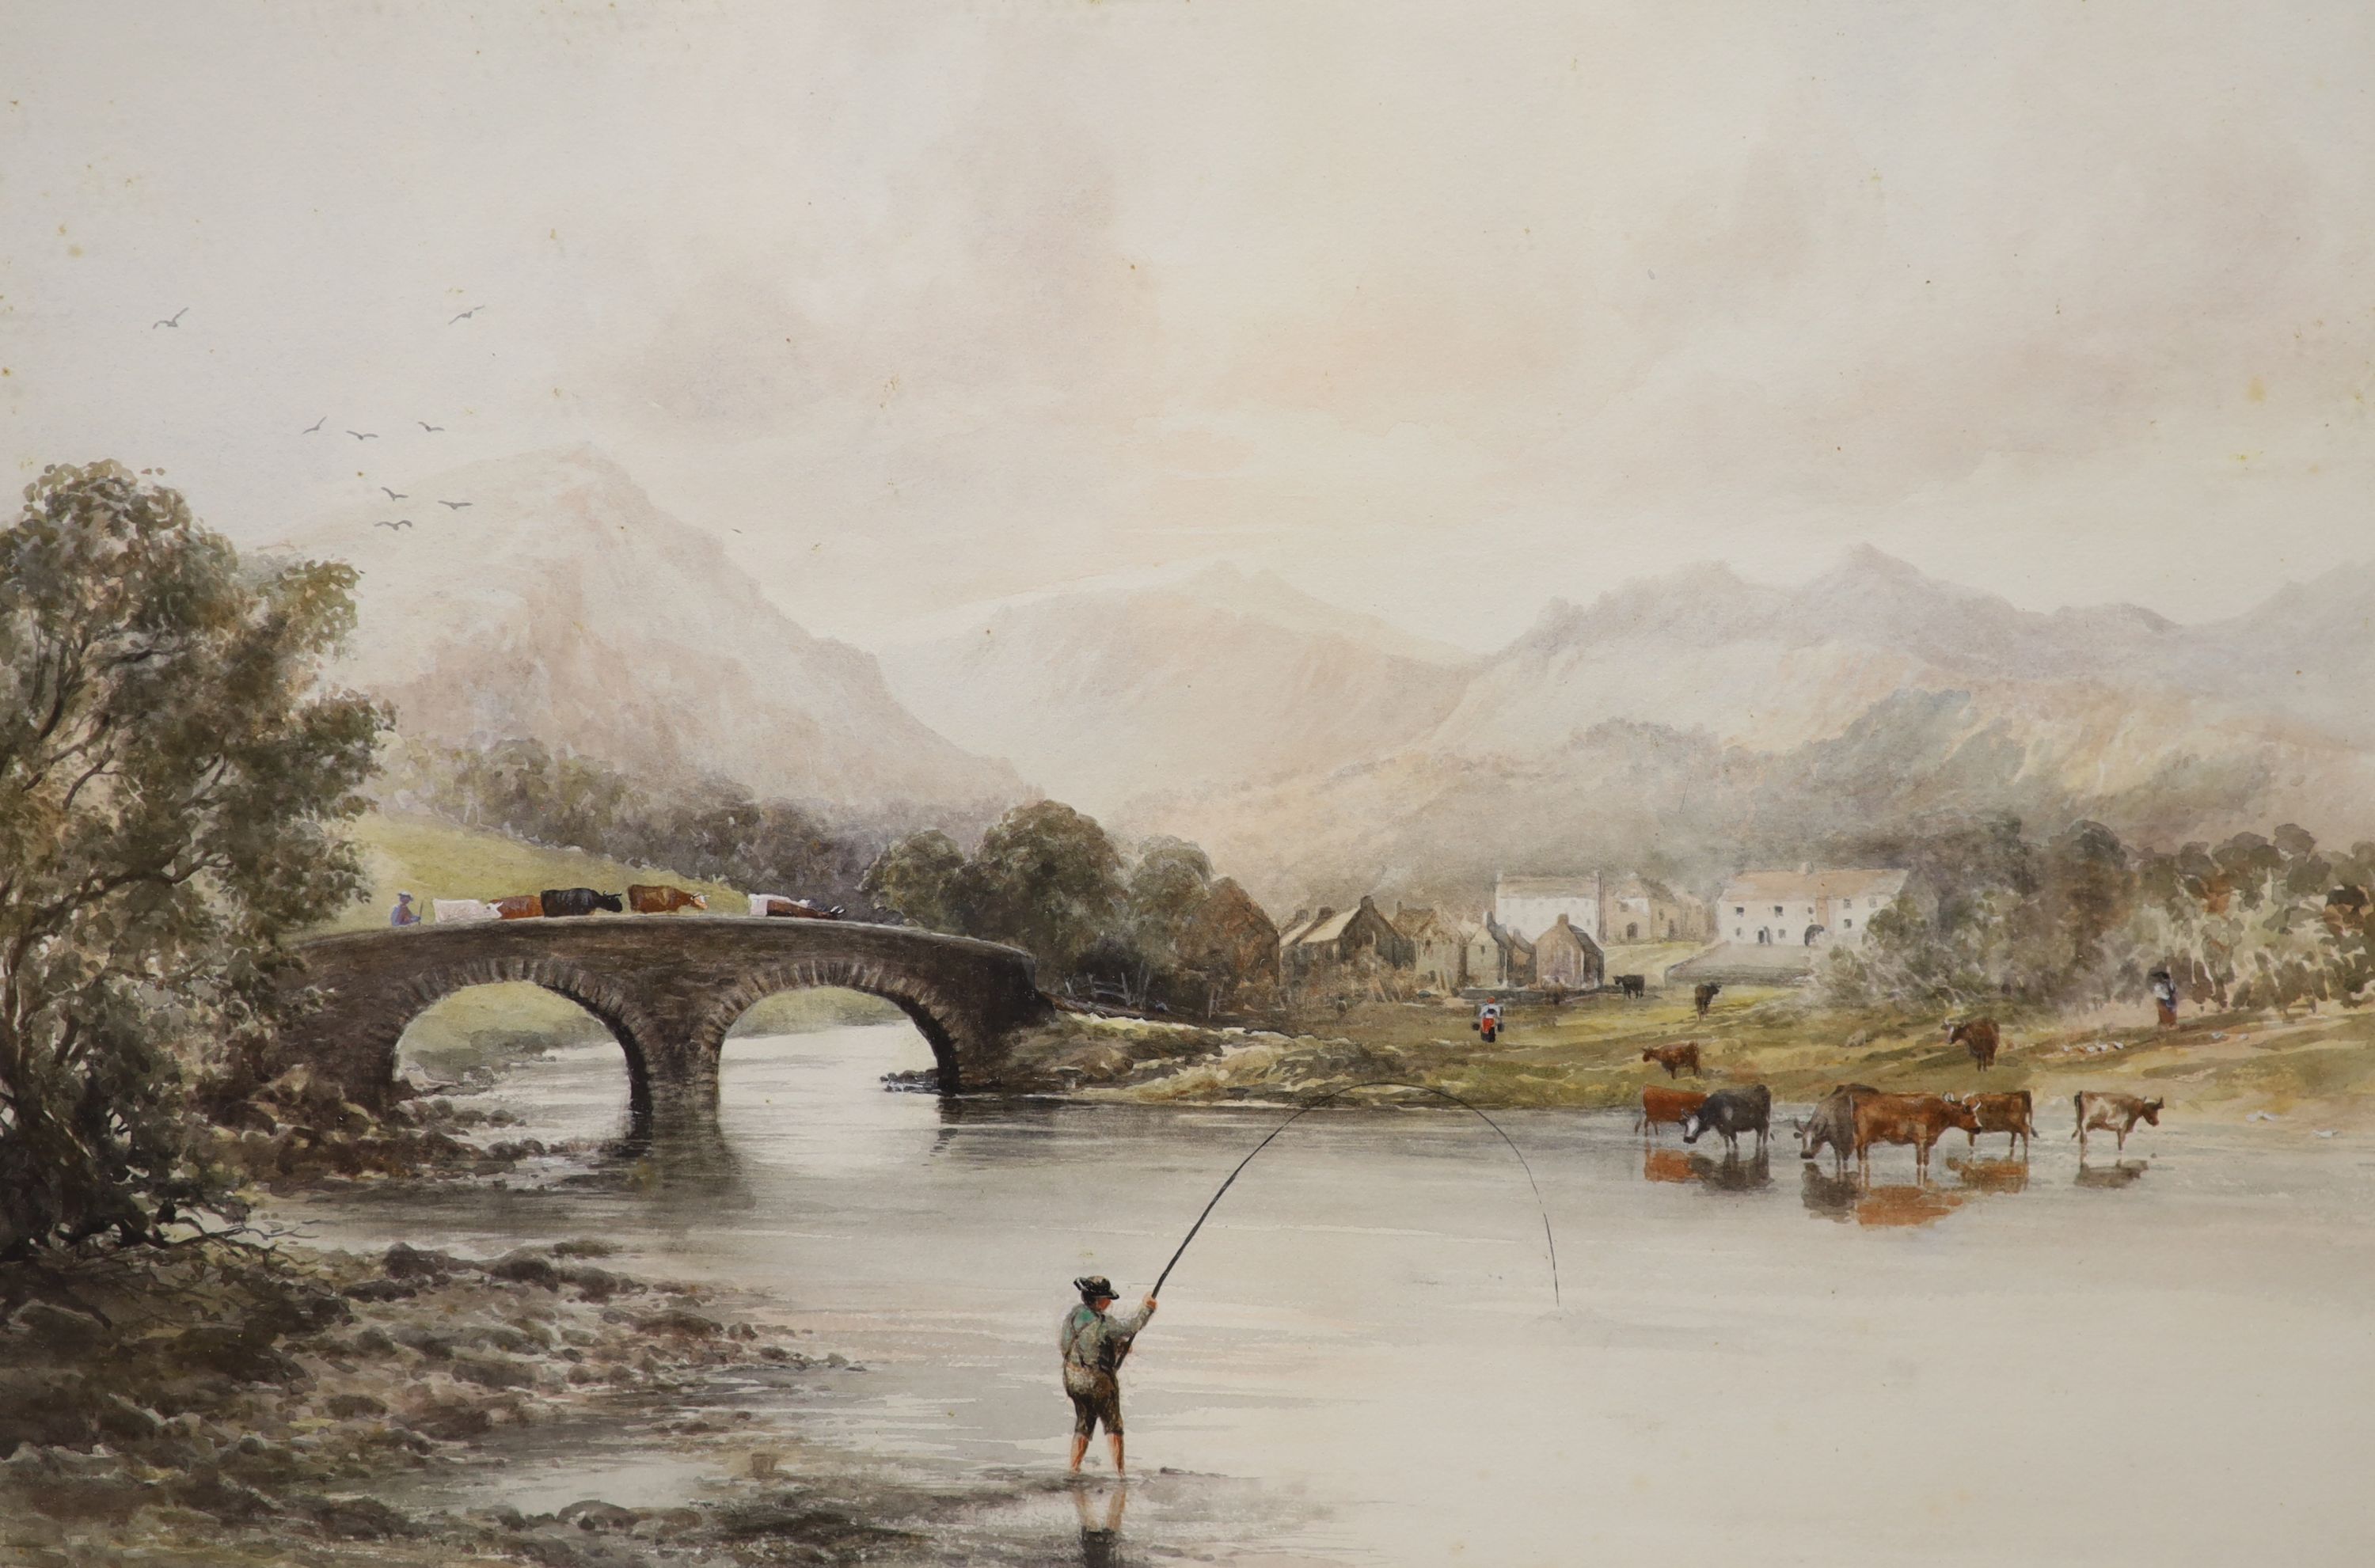 William Henry Dyer (fl.1890-1930), watercolour, Skelwith Bridge, Cumberland, signed and dated 1905, 32 x 46cm